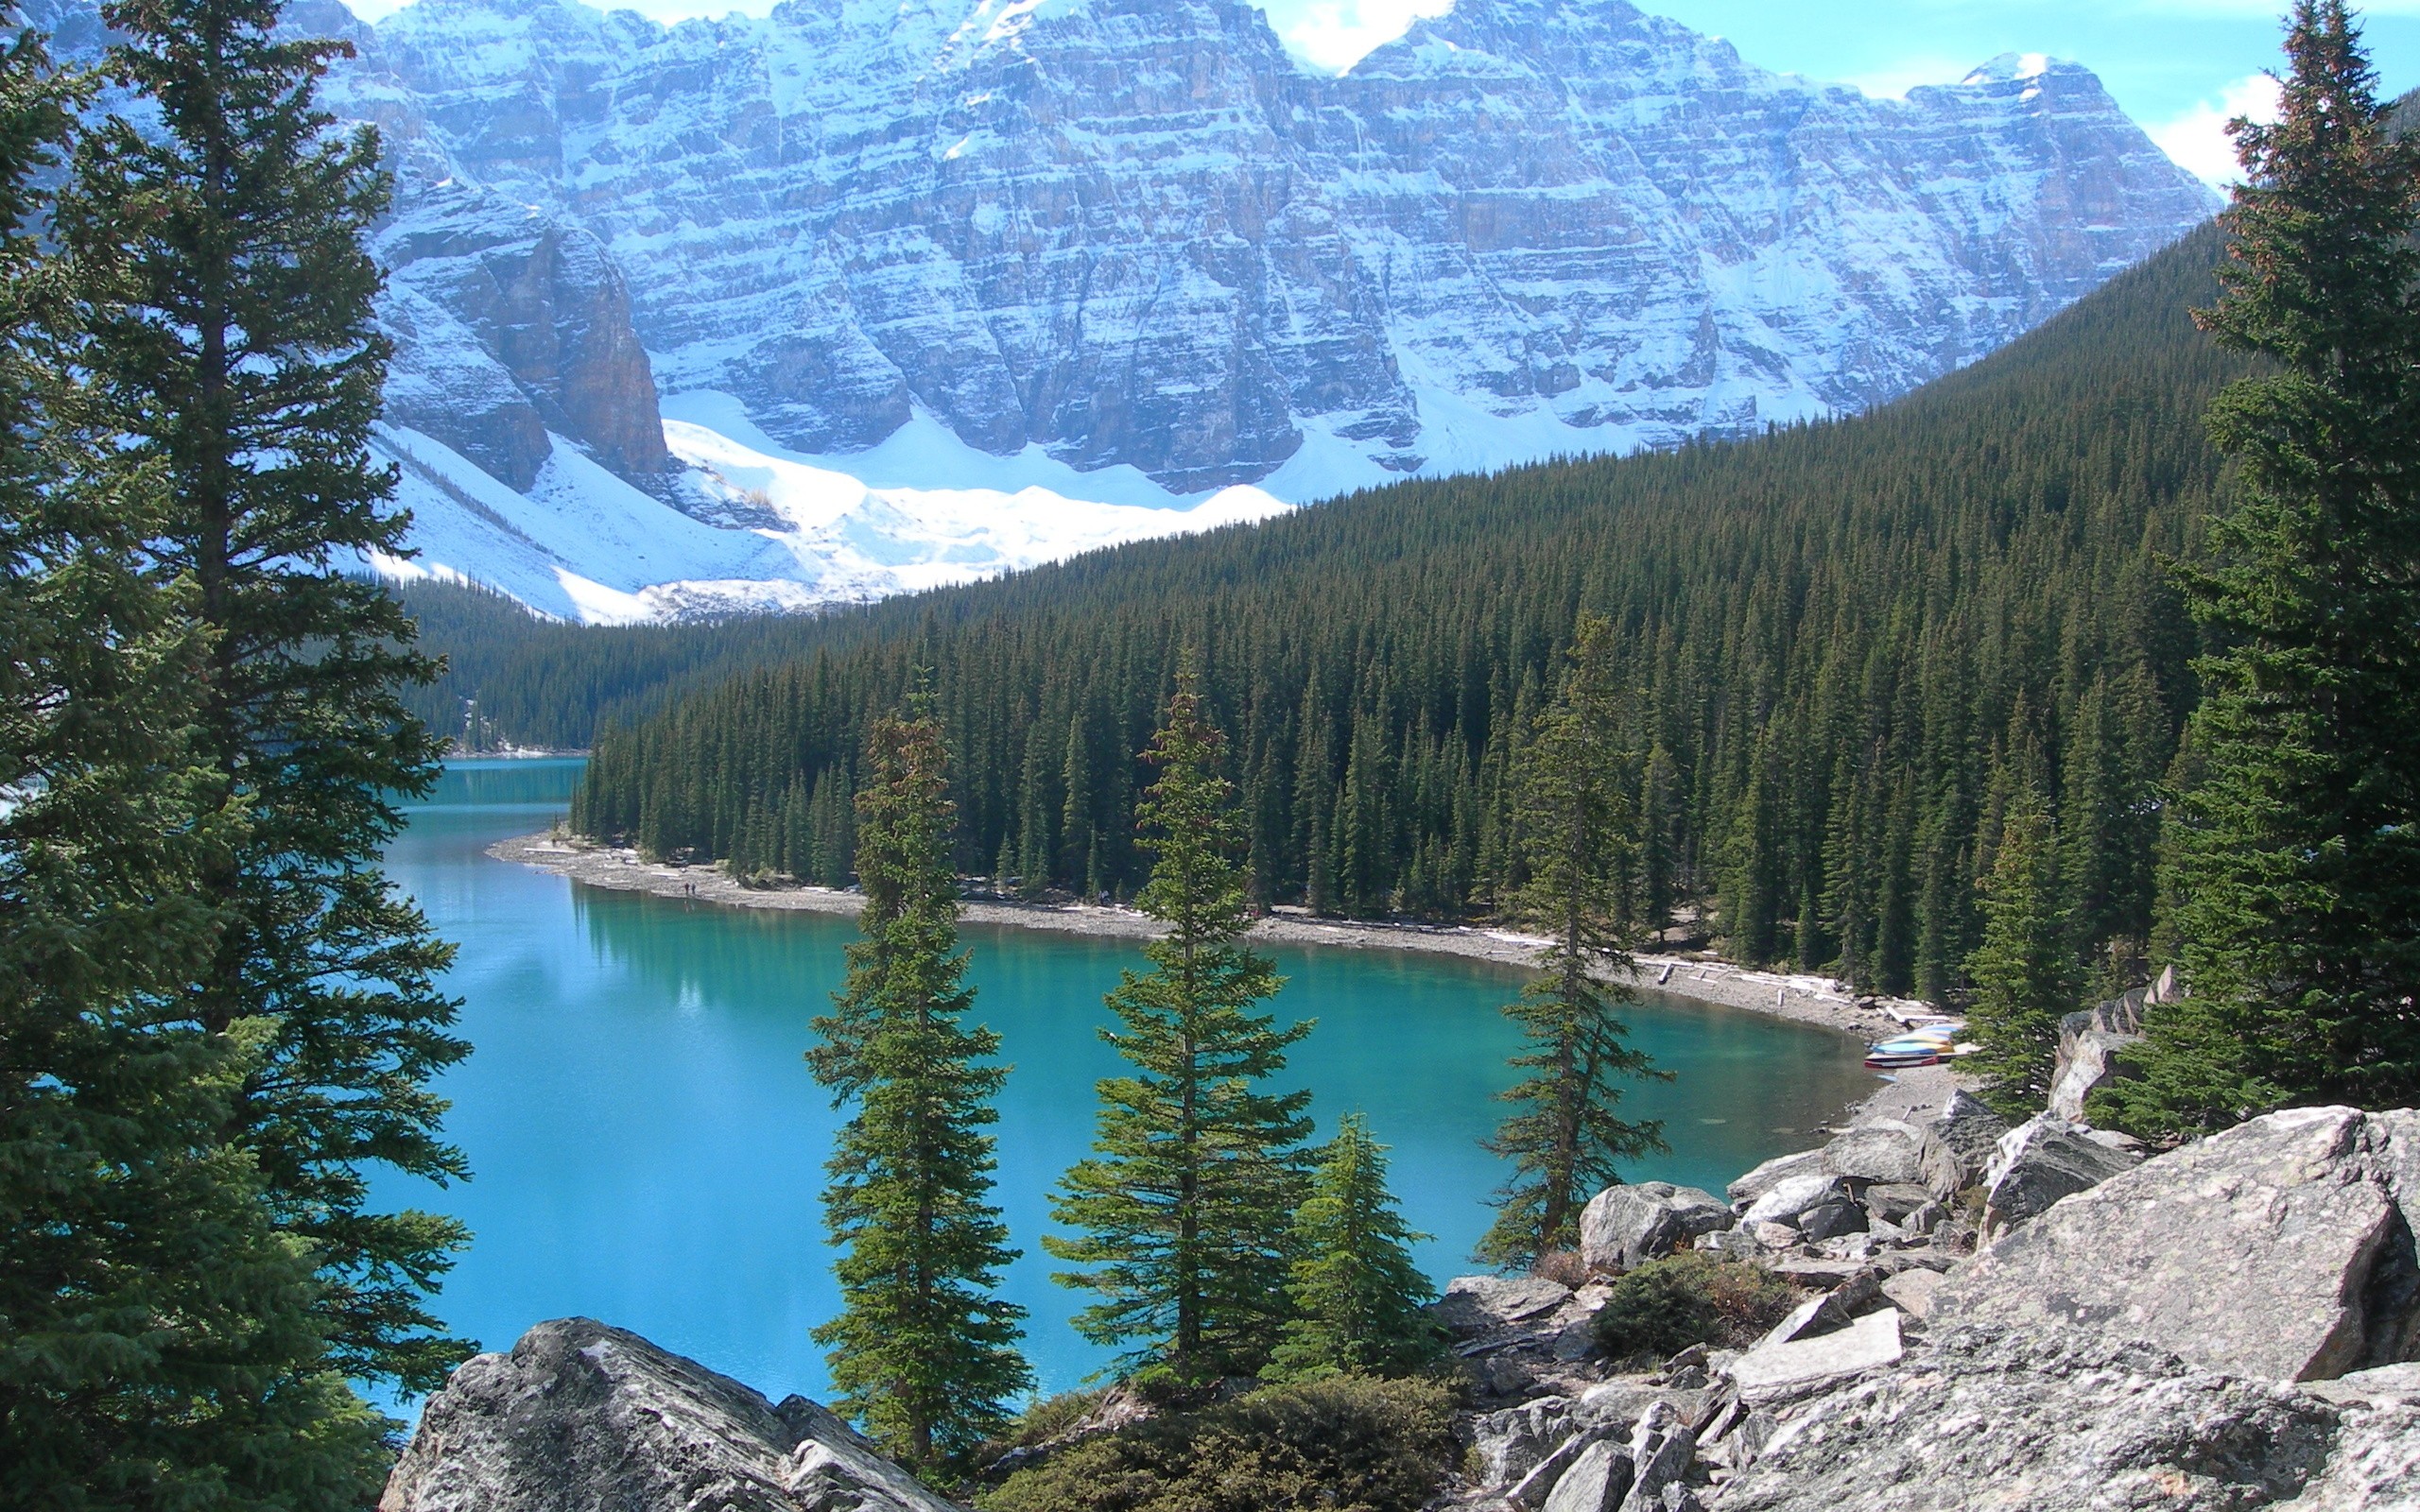 General 2560x1600 nature trees mountains Canada Banff National Park Moraine Lake